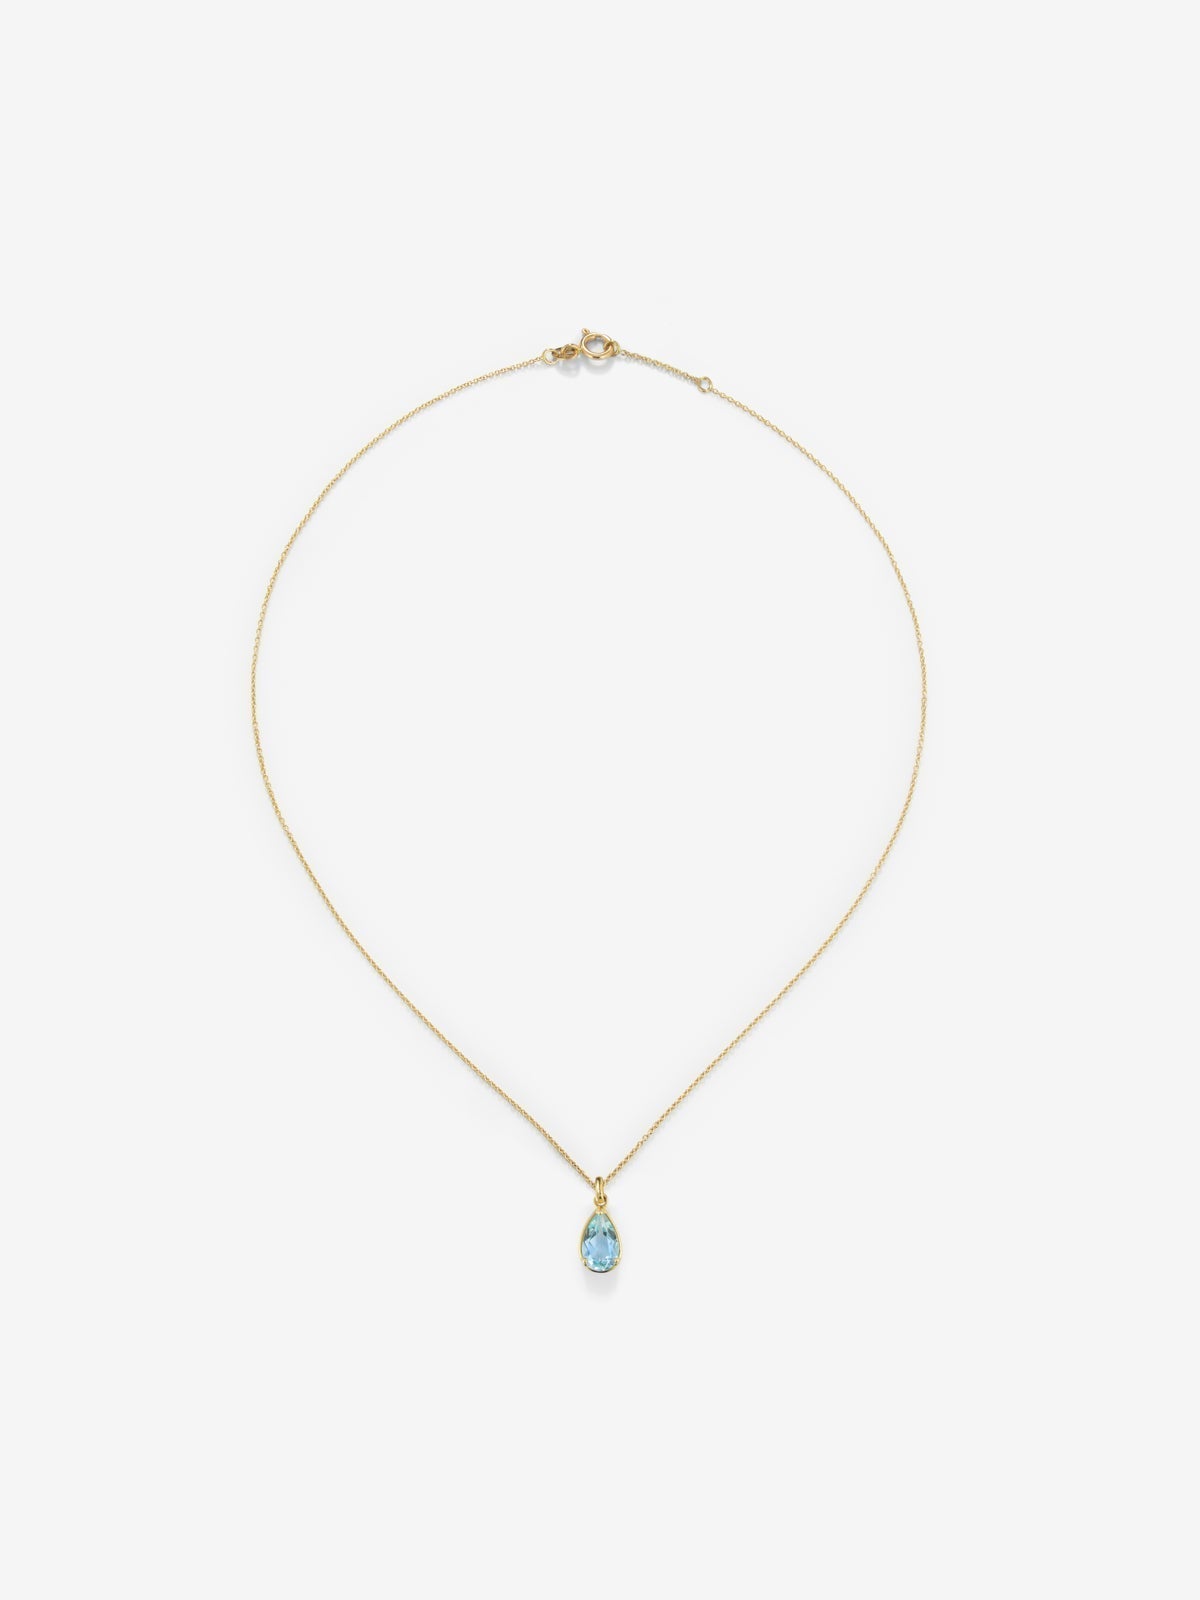 18K yellow gold pendant necklace with topaz